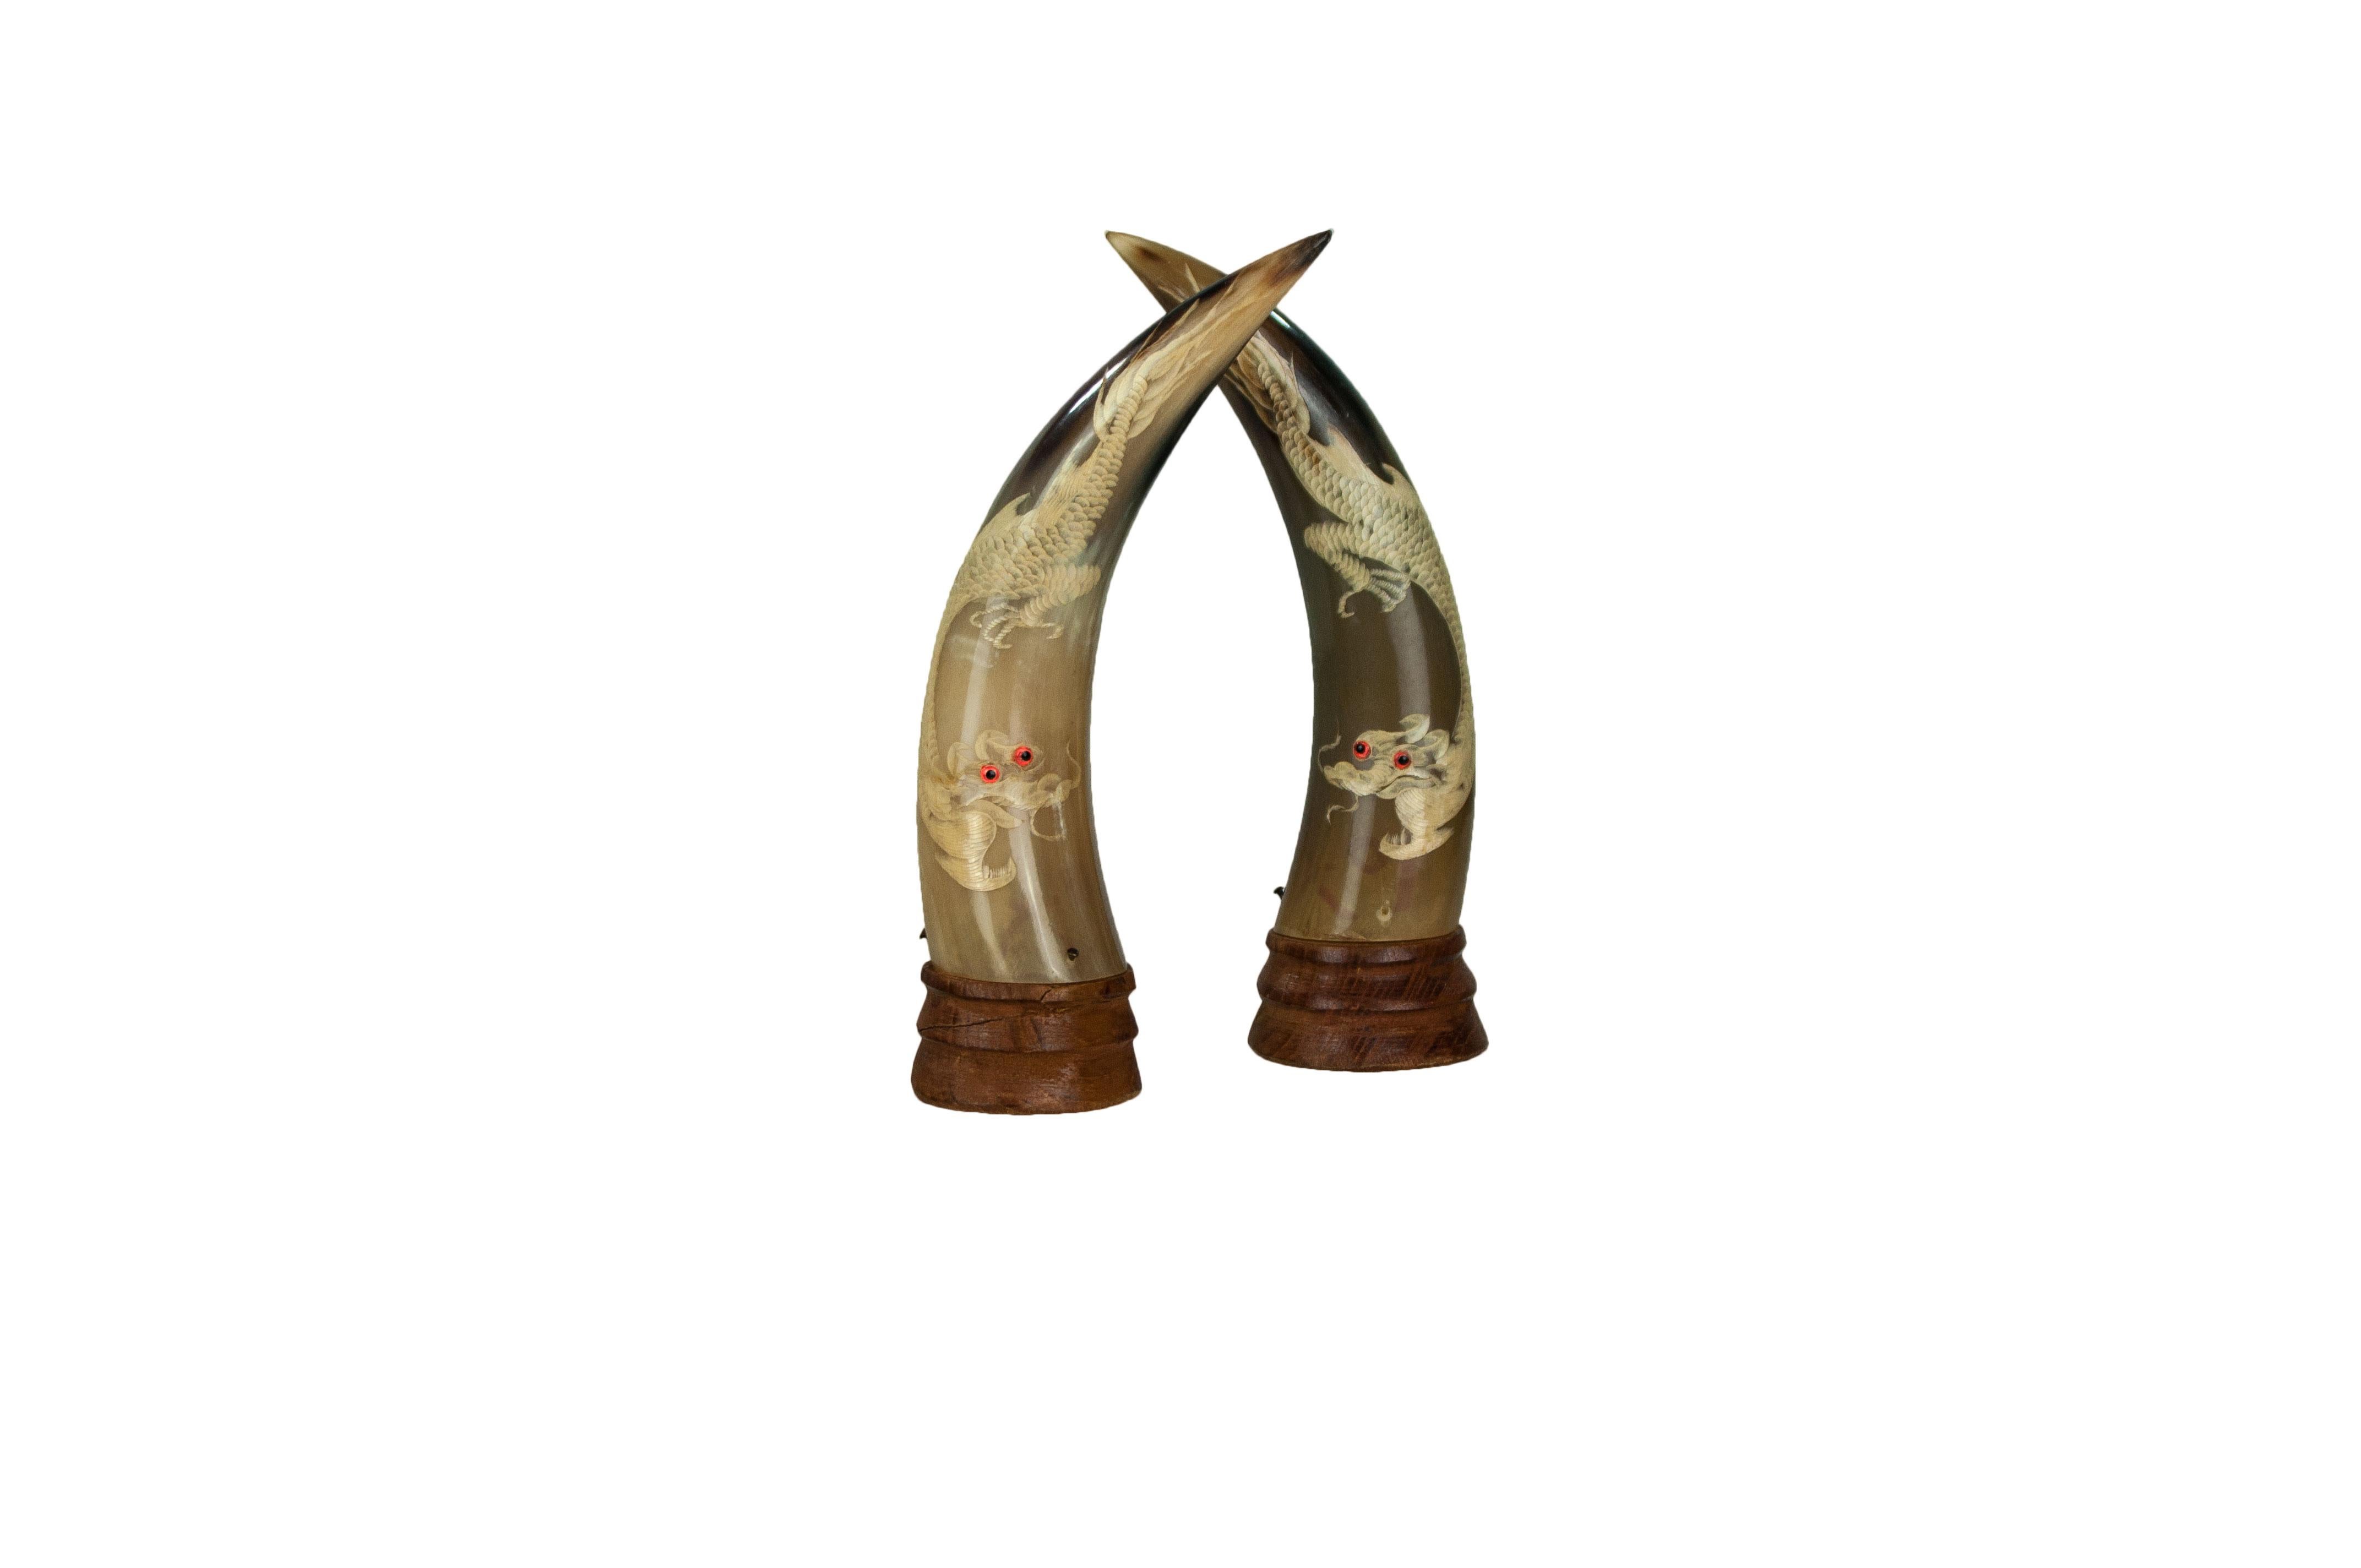 Pair of hand carved horn with white dragon and red glass eyes, circa 1930s. High quality carving work on dragon makes this piece a one of kind to have.